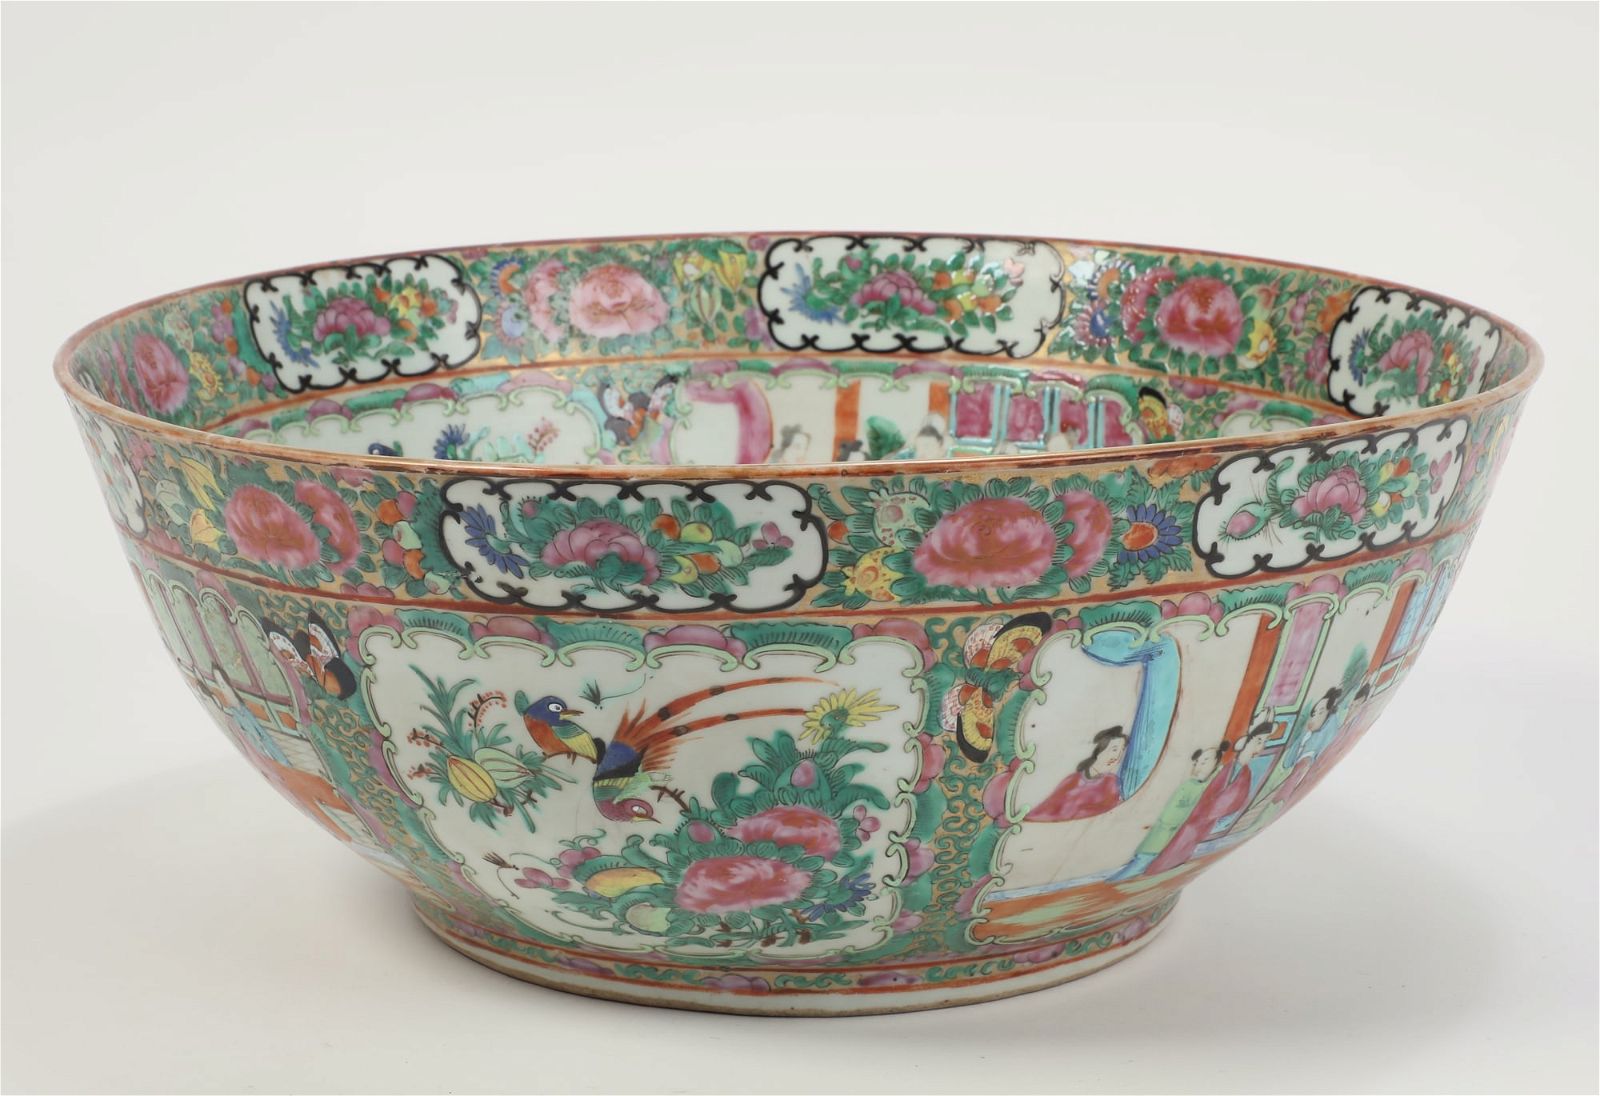 CHINESE EXPORT FAMILLE ROSE PORCELAIN 2fb2fd2